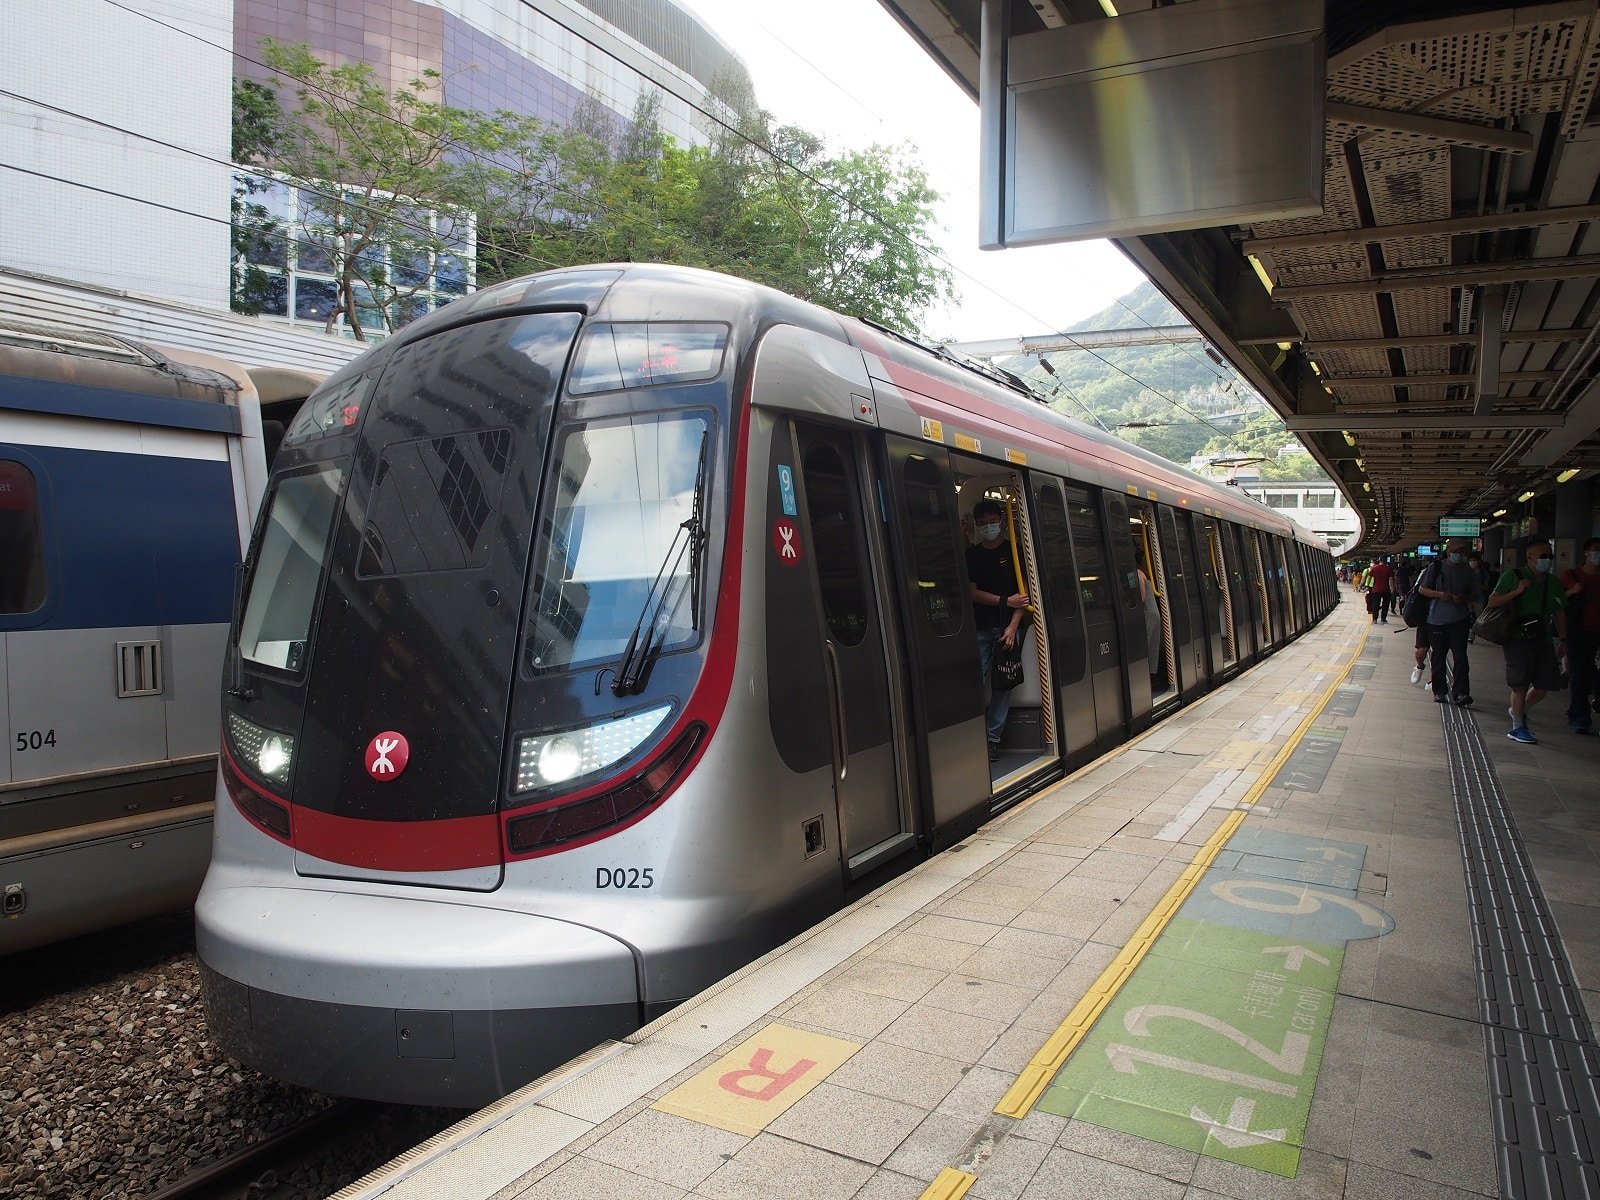 <p><span>Hong Kong’s MTR is a highly efficient, clean, and safe way to get around the city. It connects major districts, airports, and even mainland China routes. The system is well-signed in English and Chinese. </span></p> <p><b>Insider’s Tip: </b><span>Use an Octopus card for convenient and discounted travel. </span></p> <p><b>When to Travel: </b><span>Avoid peak hours, especially early mornings and late afternoons on weekdays. 7.</span></p>